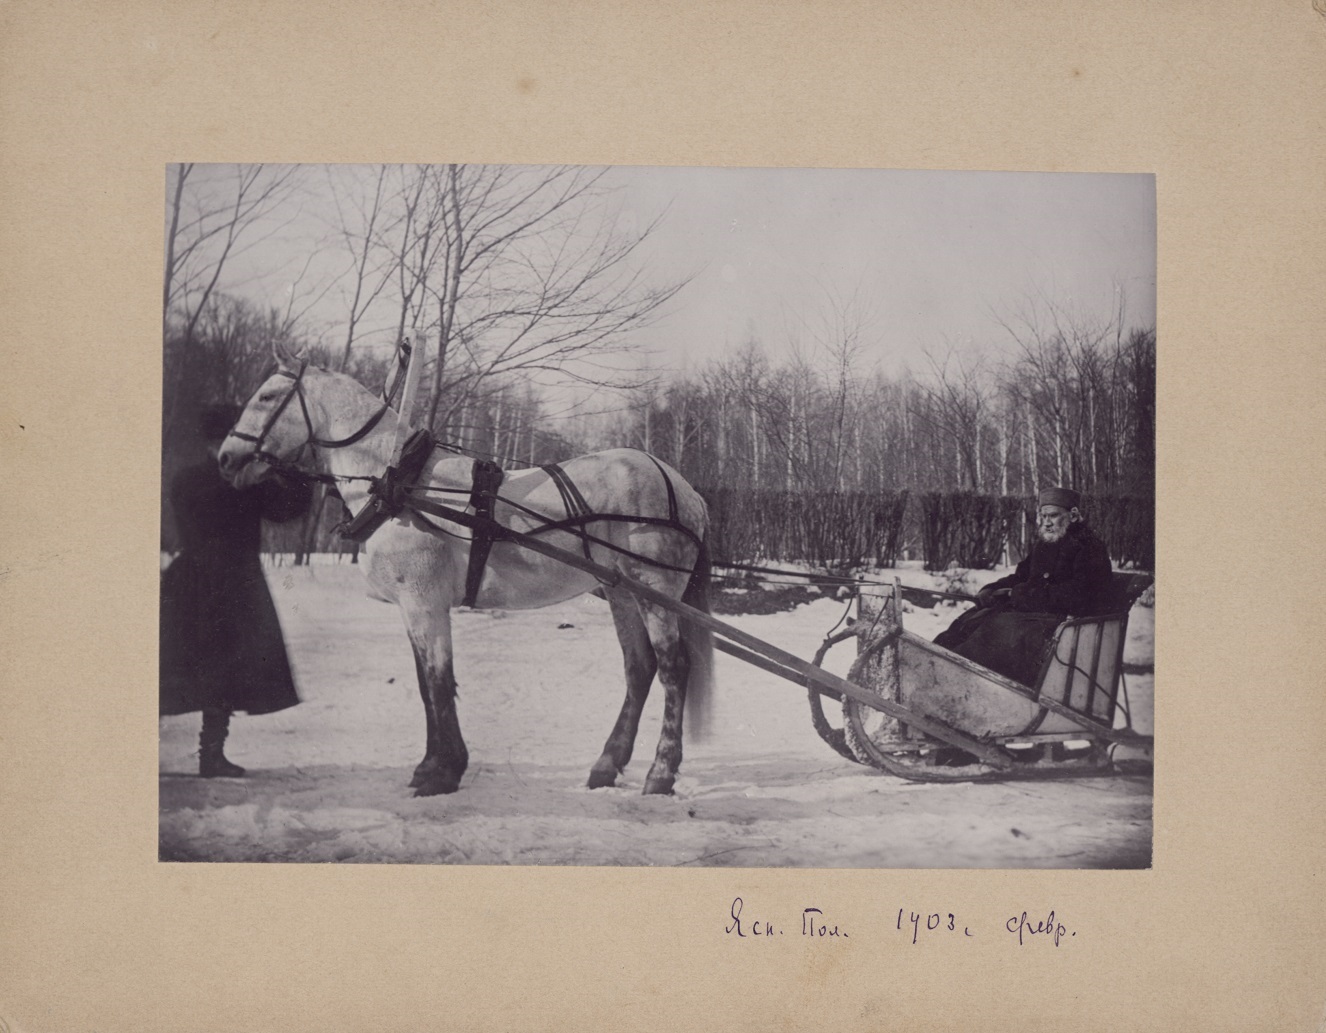 Most of the photo-portraits of Tolstoy were done at the initiative of Sofia. Her camera recorded important events and everyday life // Tolstoy in a one-horse sleigh, 1903, Yasnaya Polyana. Photo by Sofia Tolstoy